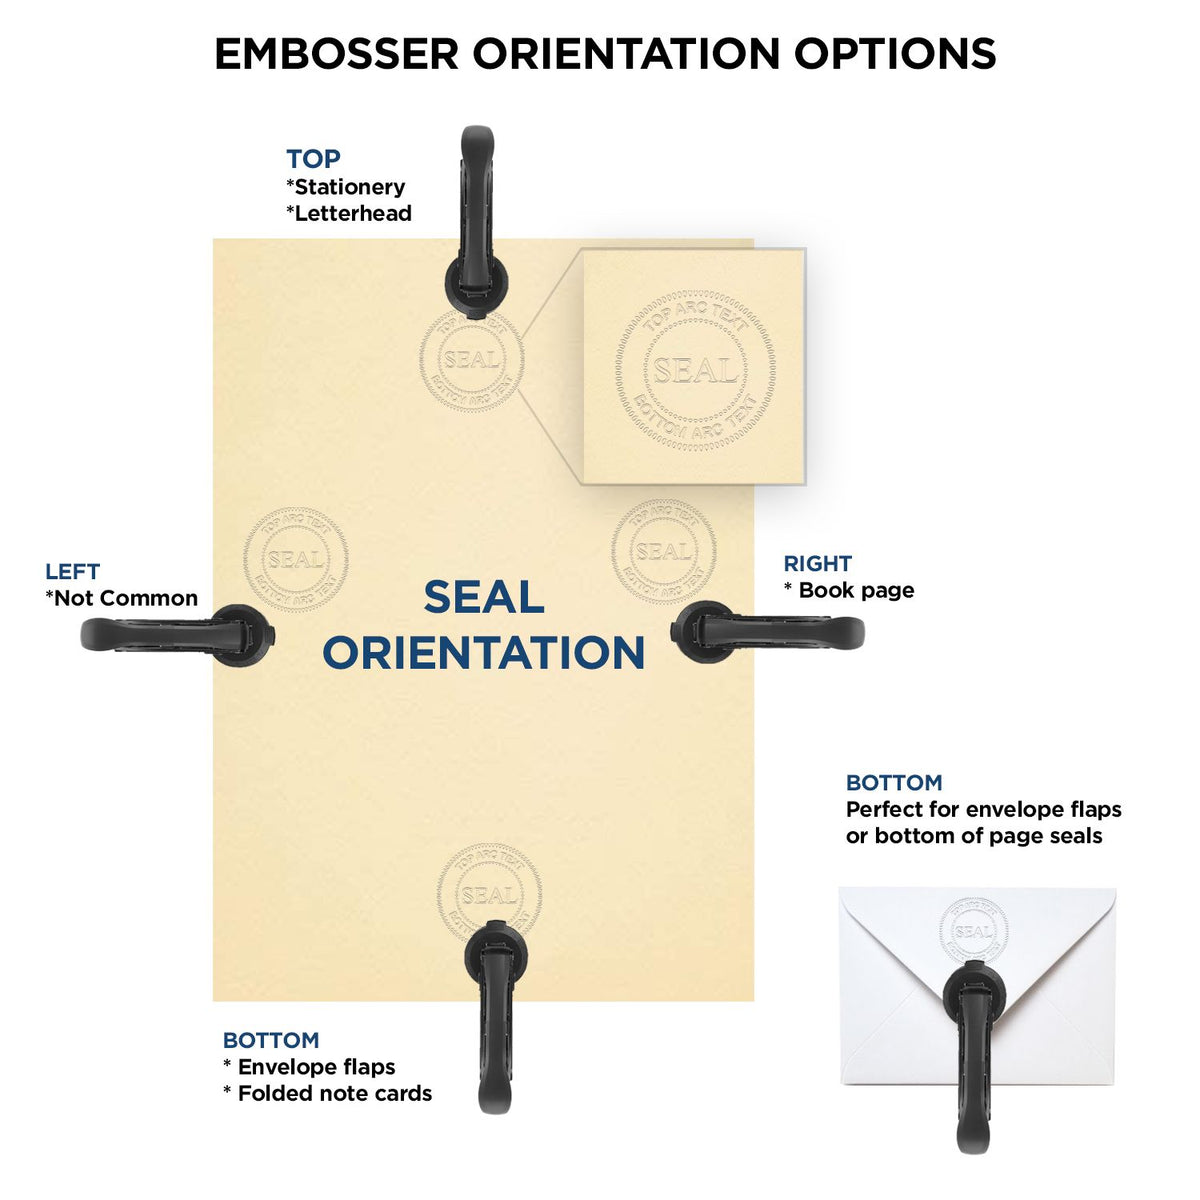 An infographic for the Florida Geologist Desk Seal showing embosser orientation, this is showing examples of a top, bottom, right and left insert.